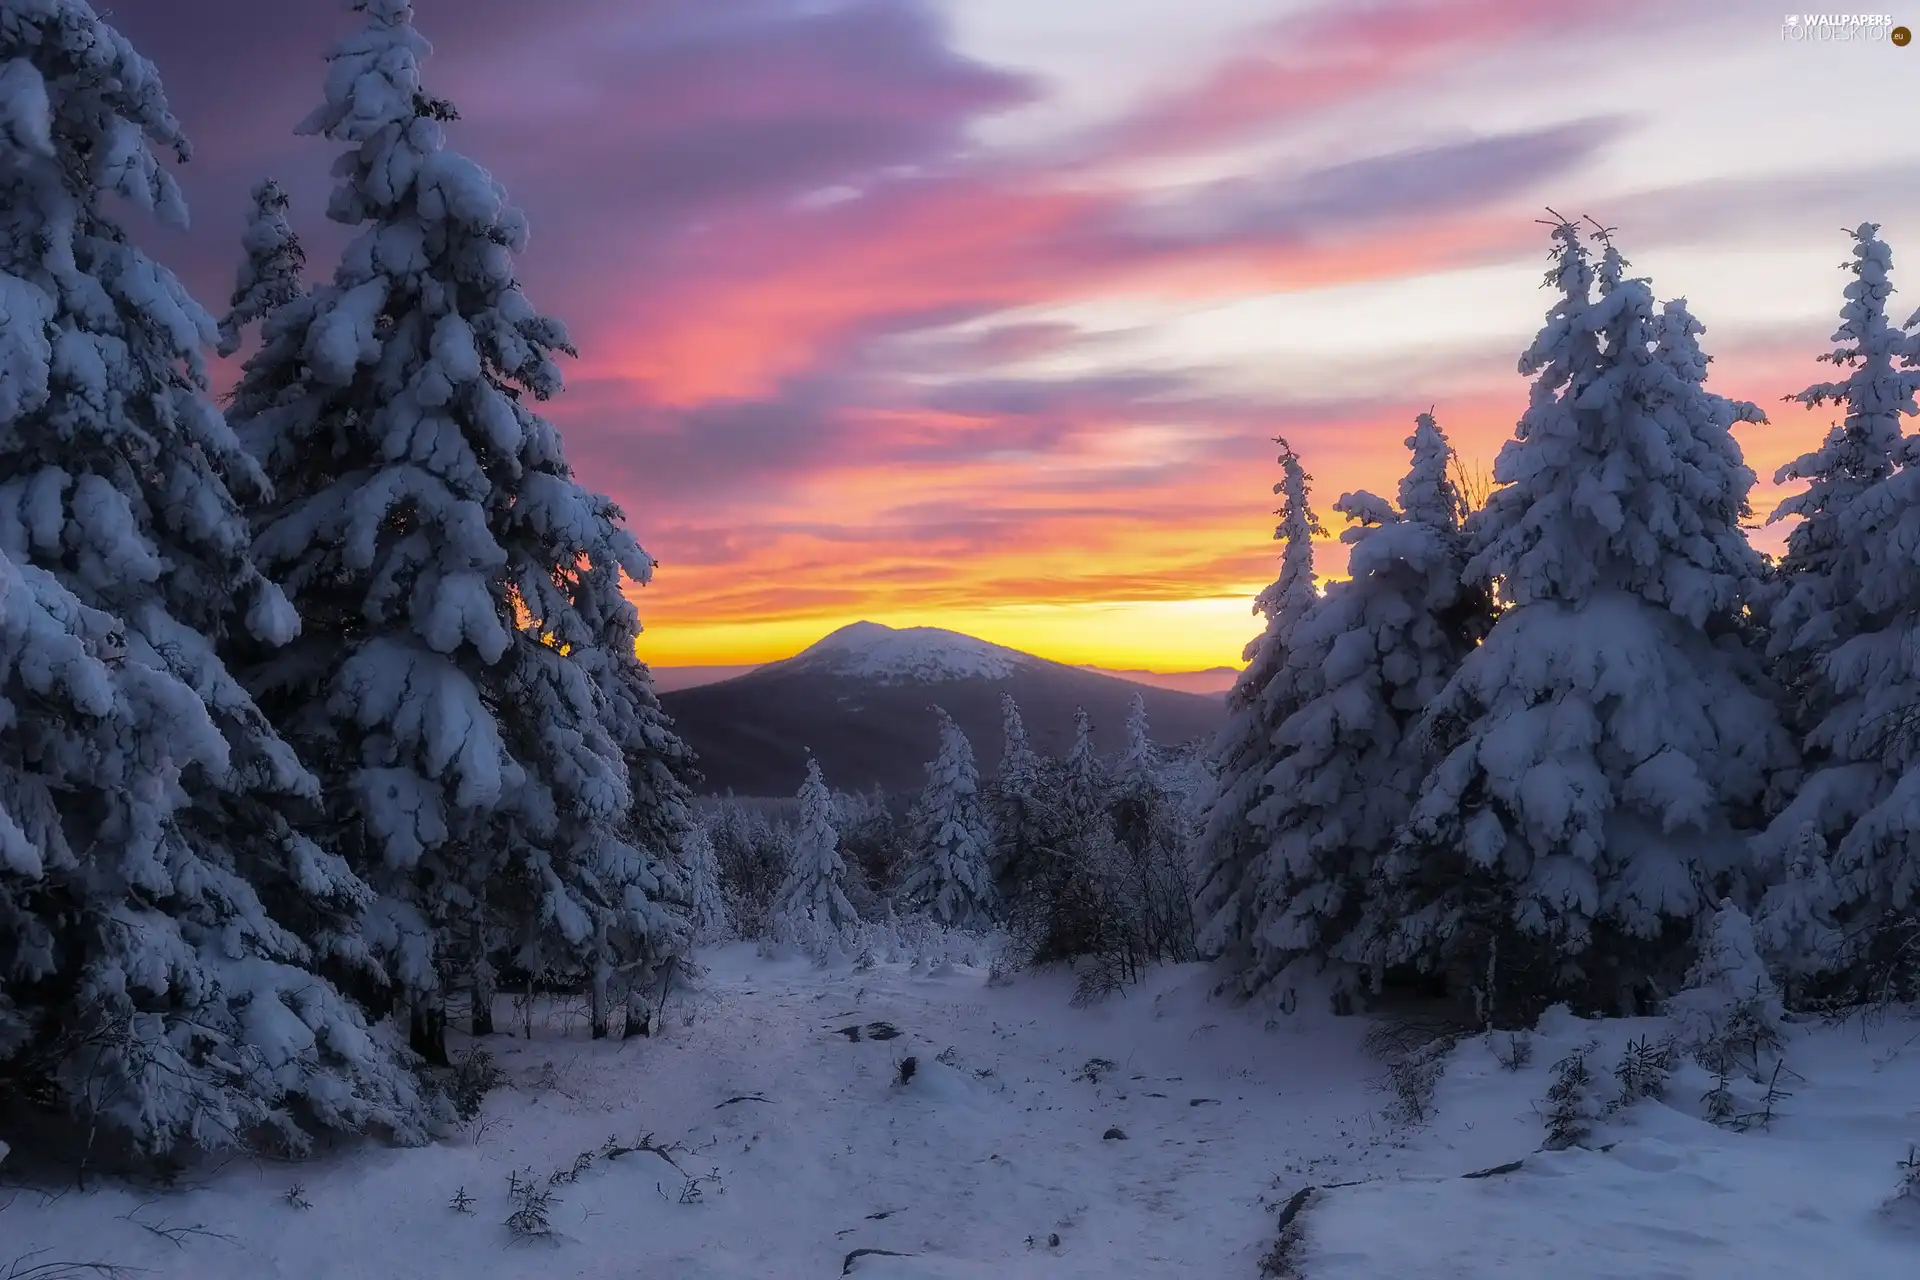 Snowy, winter, viewes, Sunrise, trees, Mountains